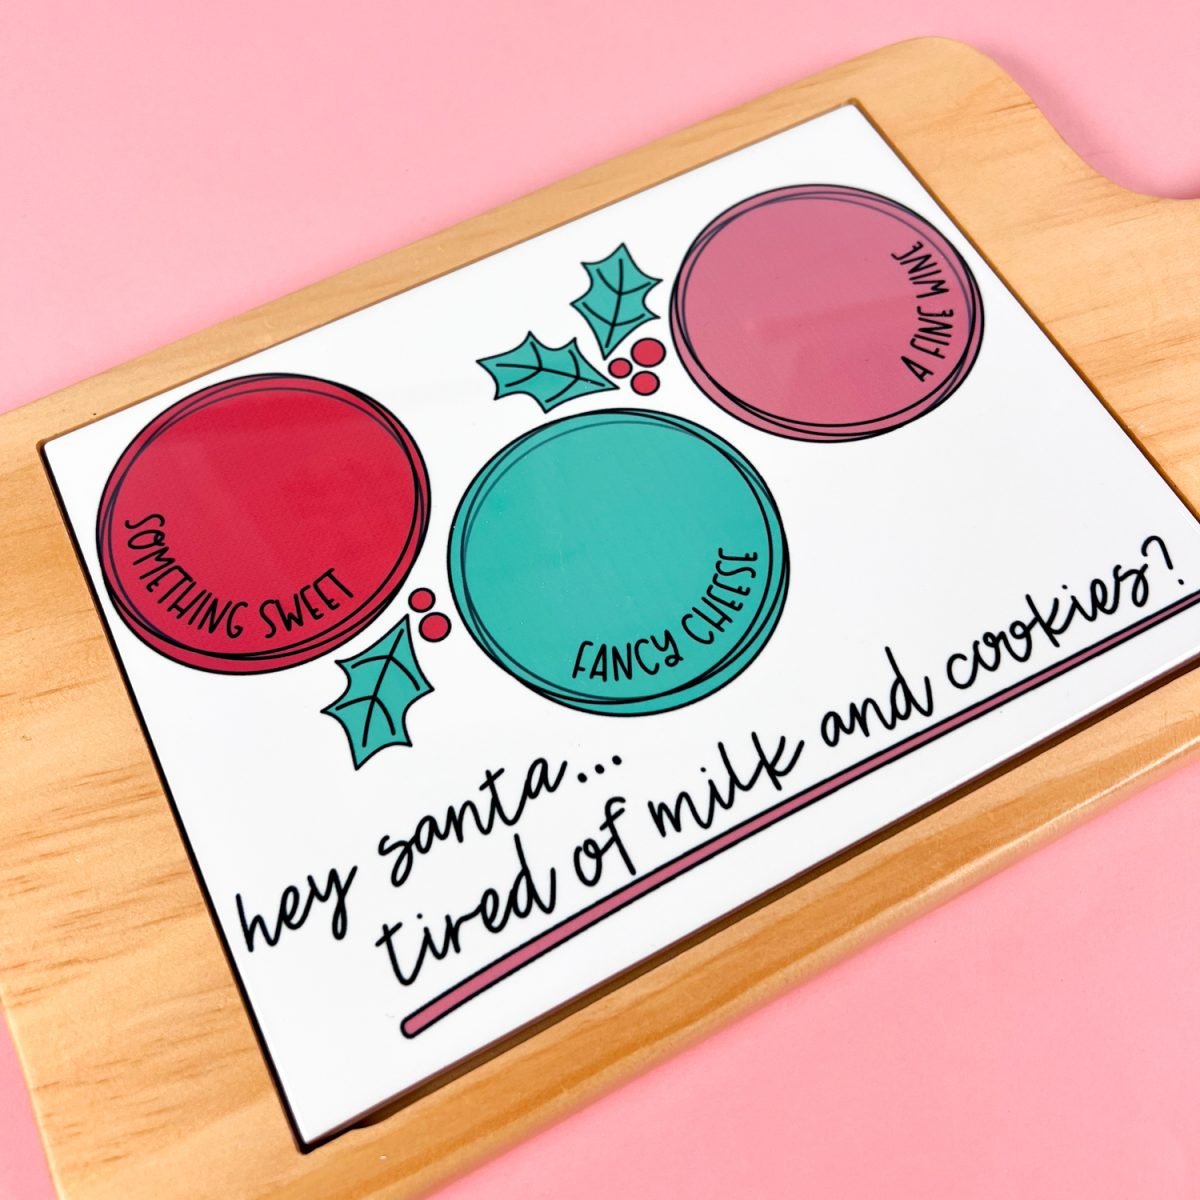 Santa tray cheese board on pink background